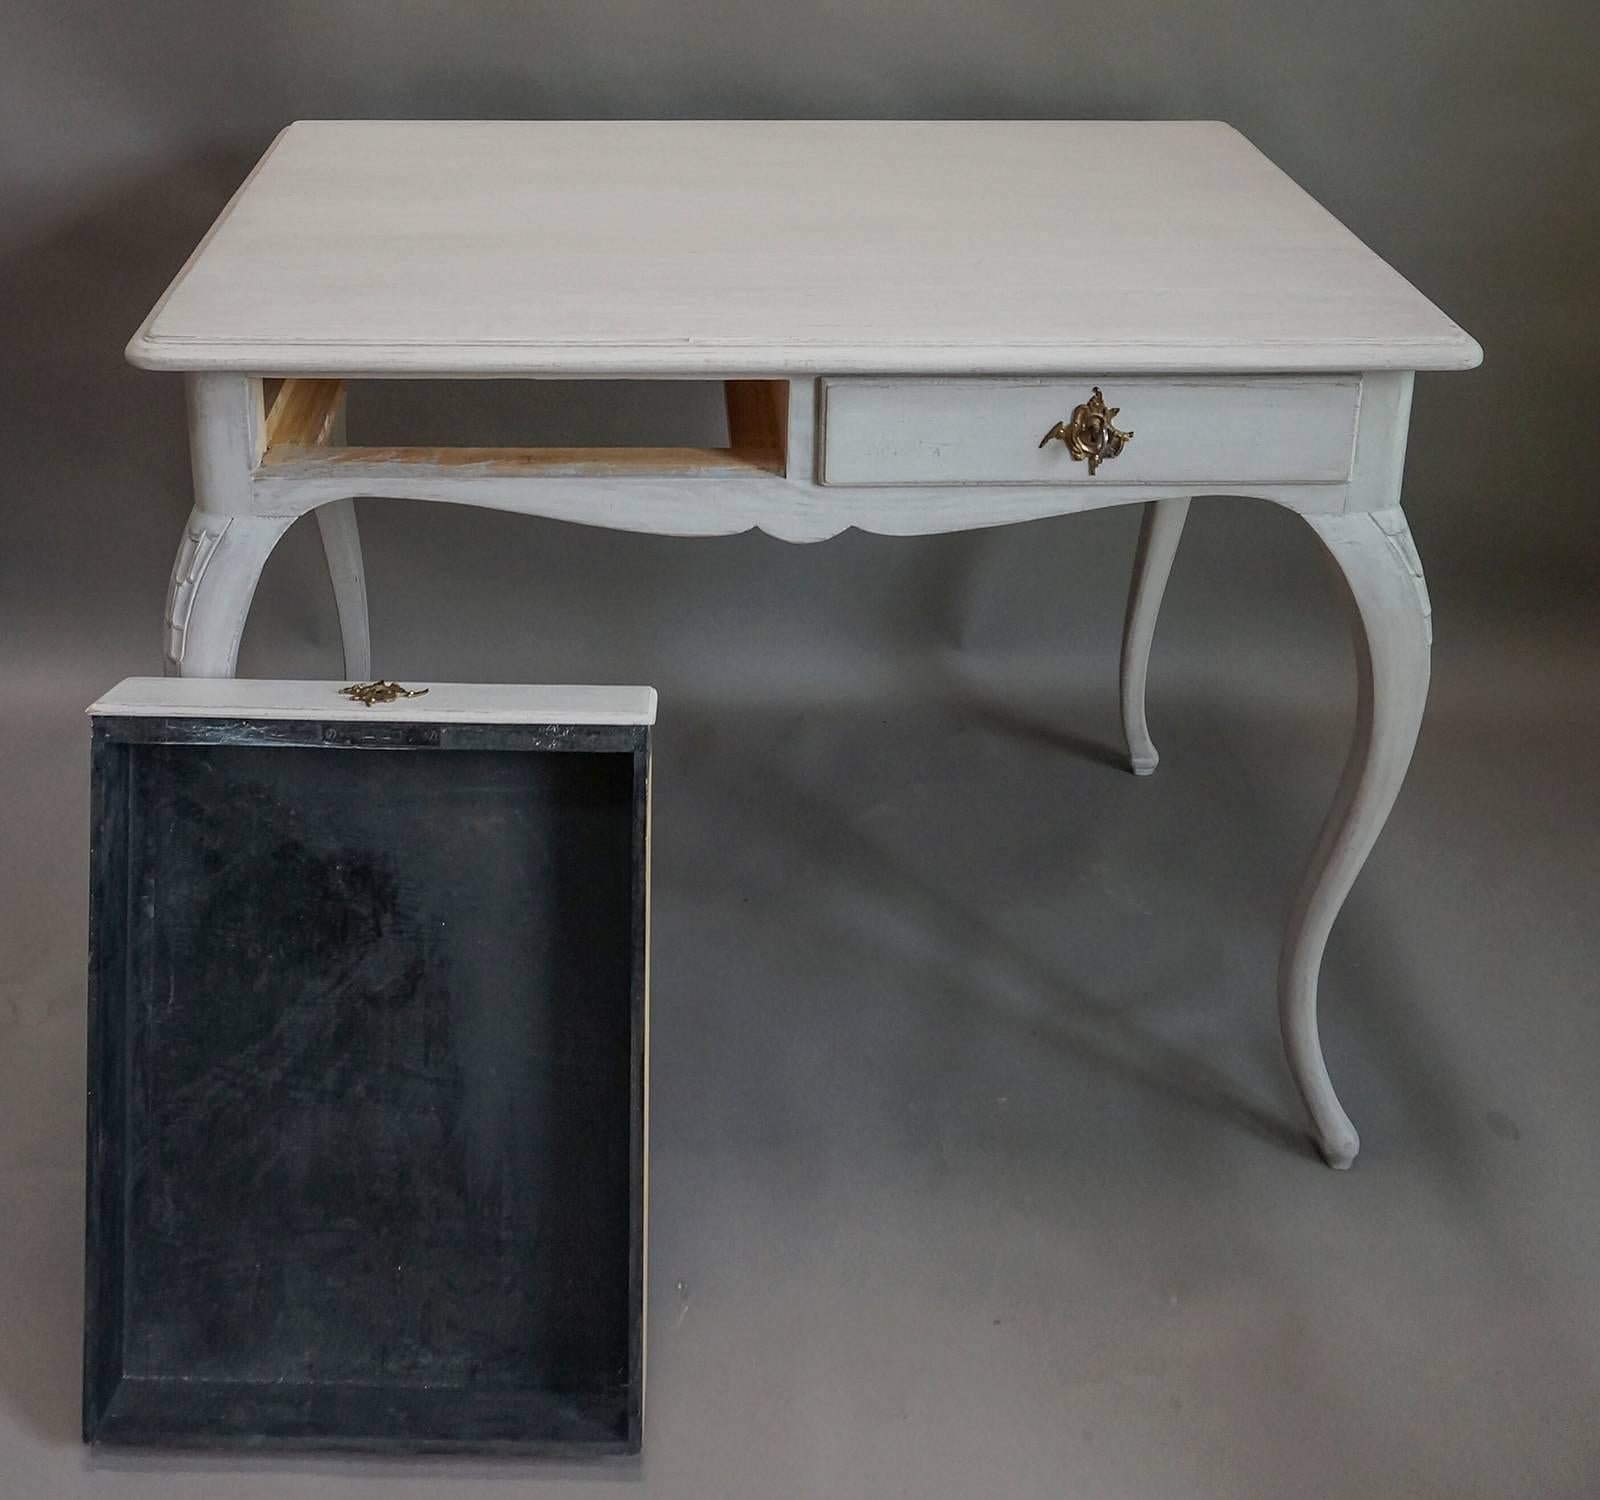 Graceful writing desk, Sweden, circa 1920, with two apron drawers and delicate cabriole legs with carving on the knees.